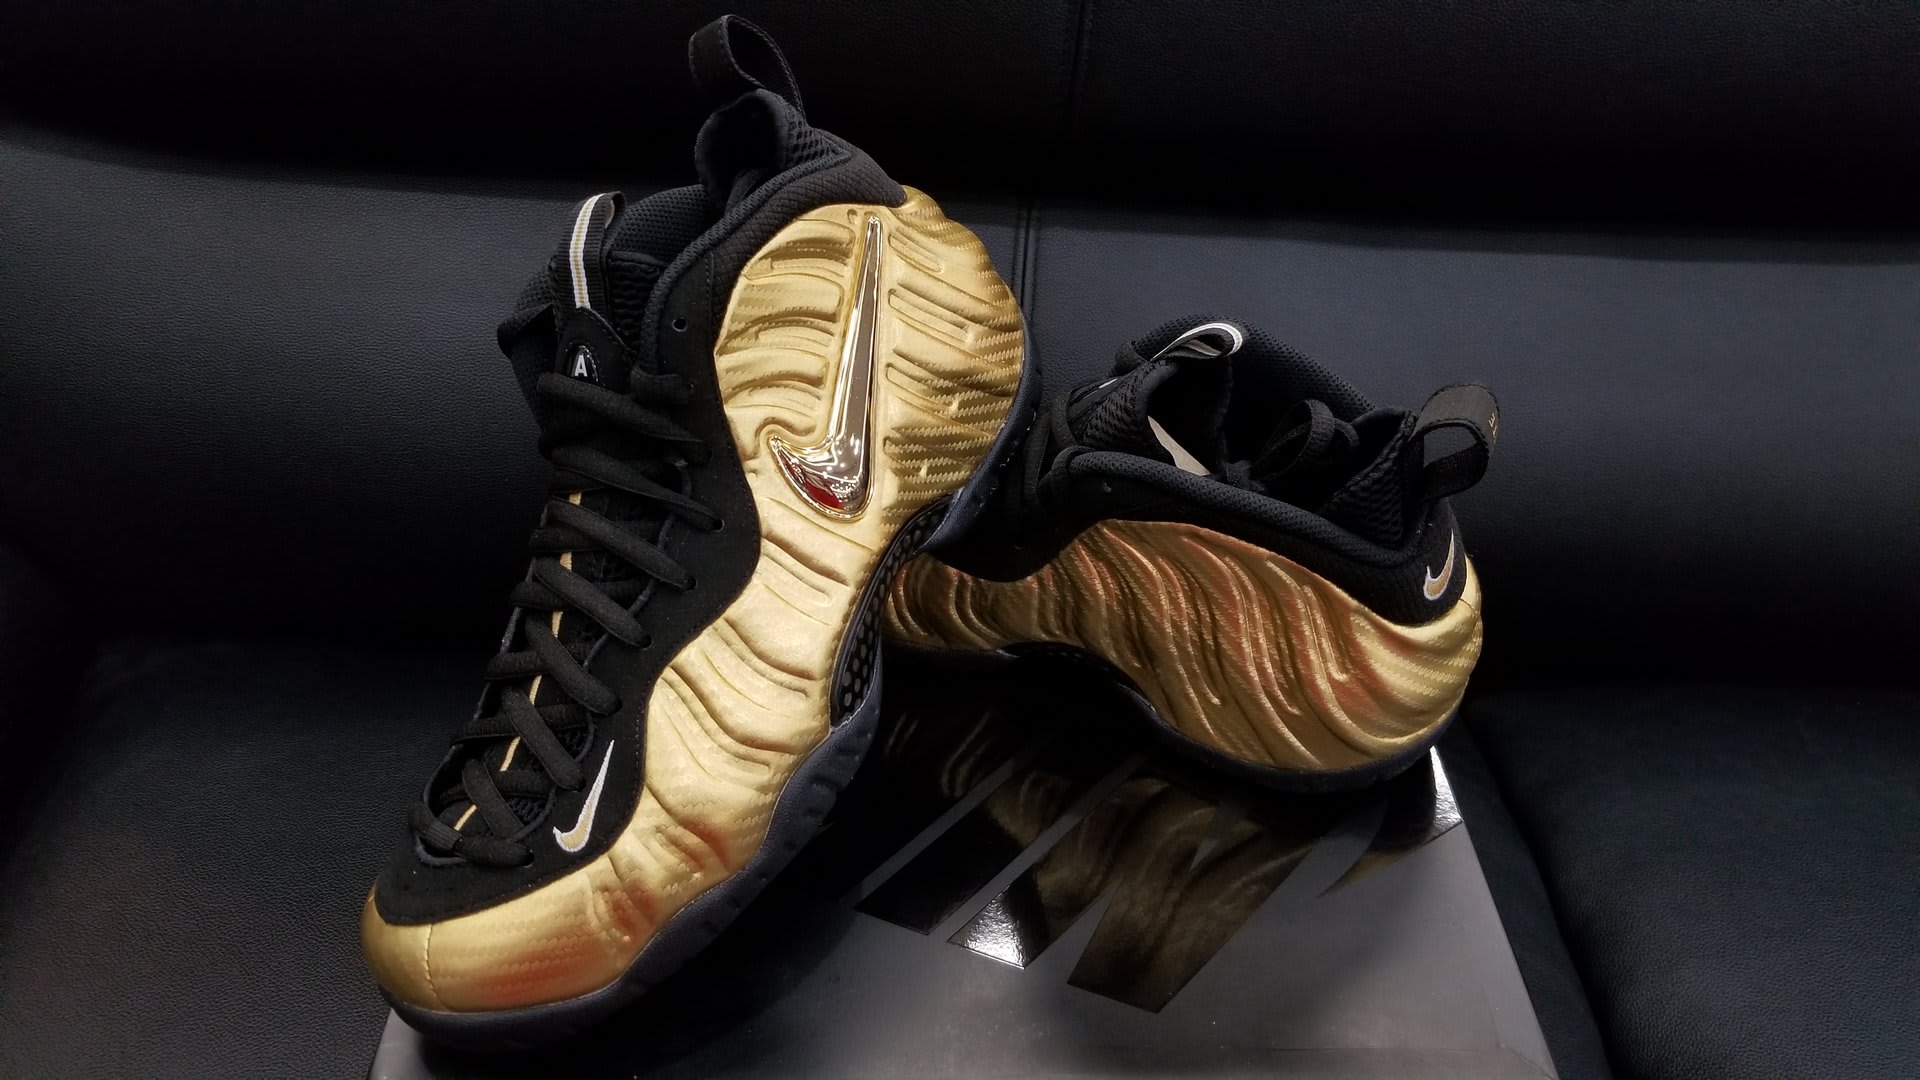 Nike Air Foamposite Pro Metallic Gold Release Date Lateral 624041-701